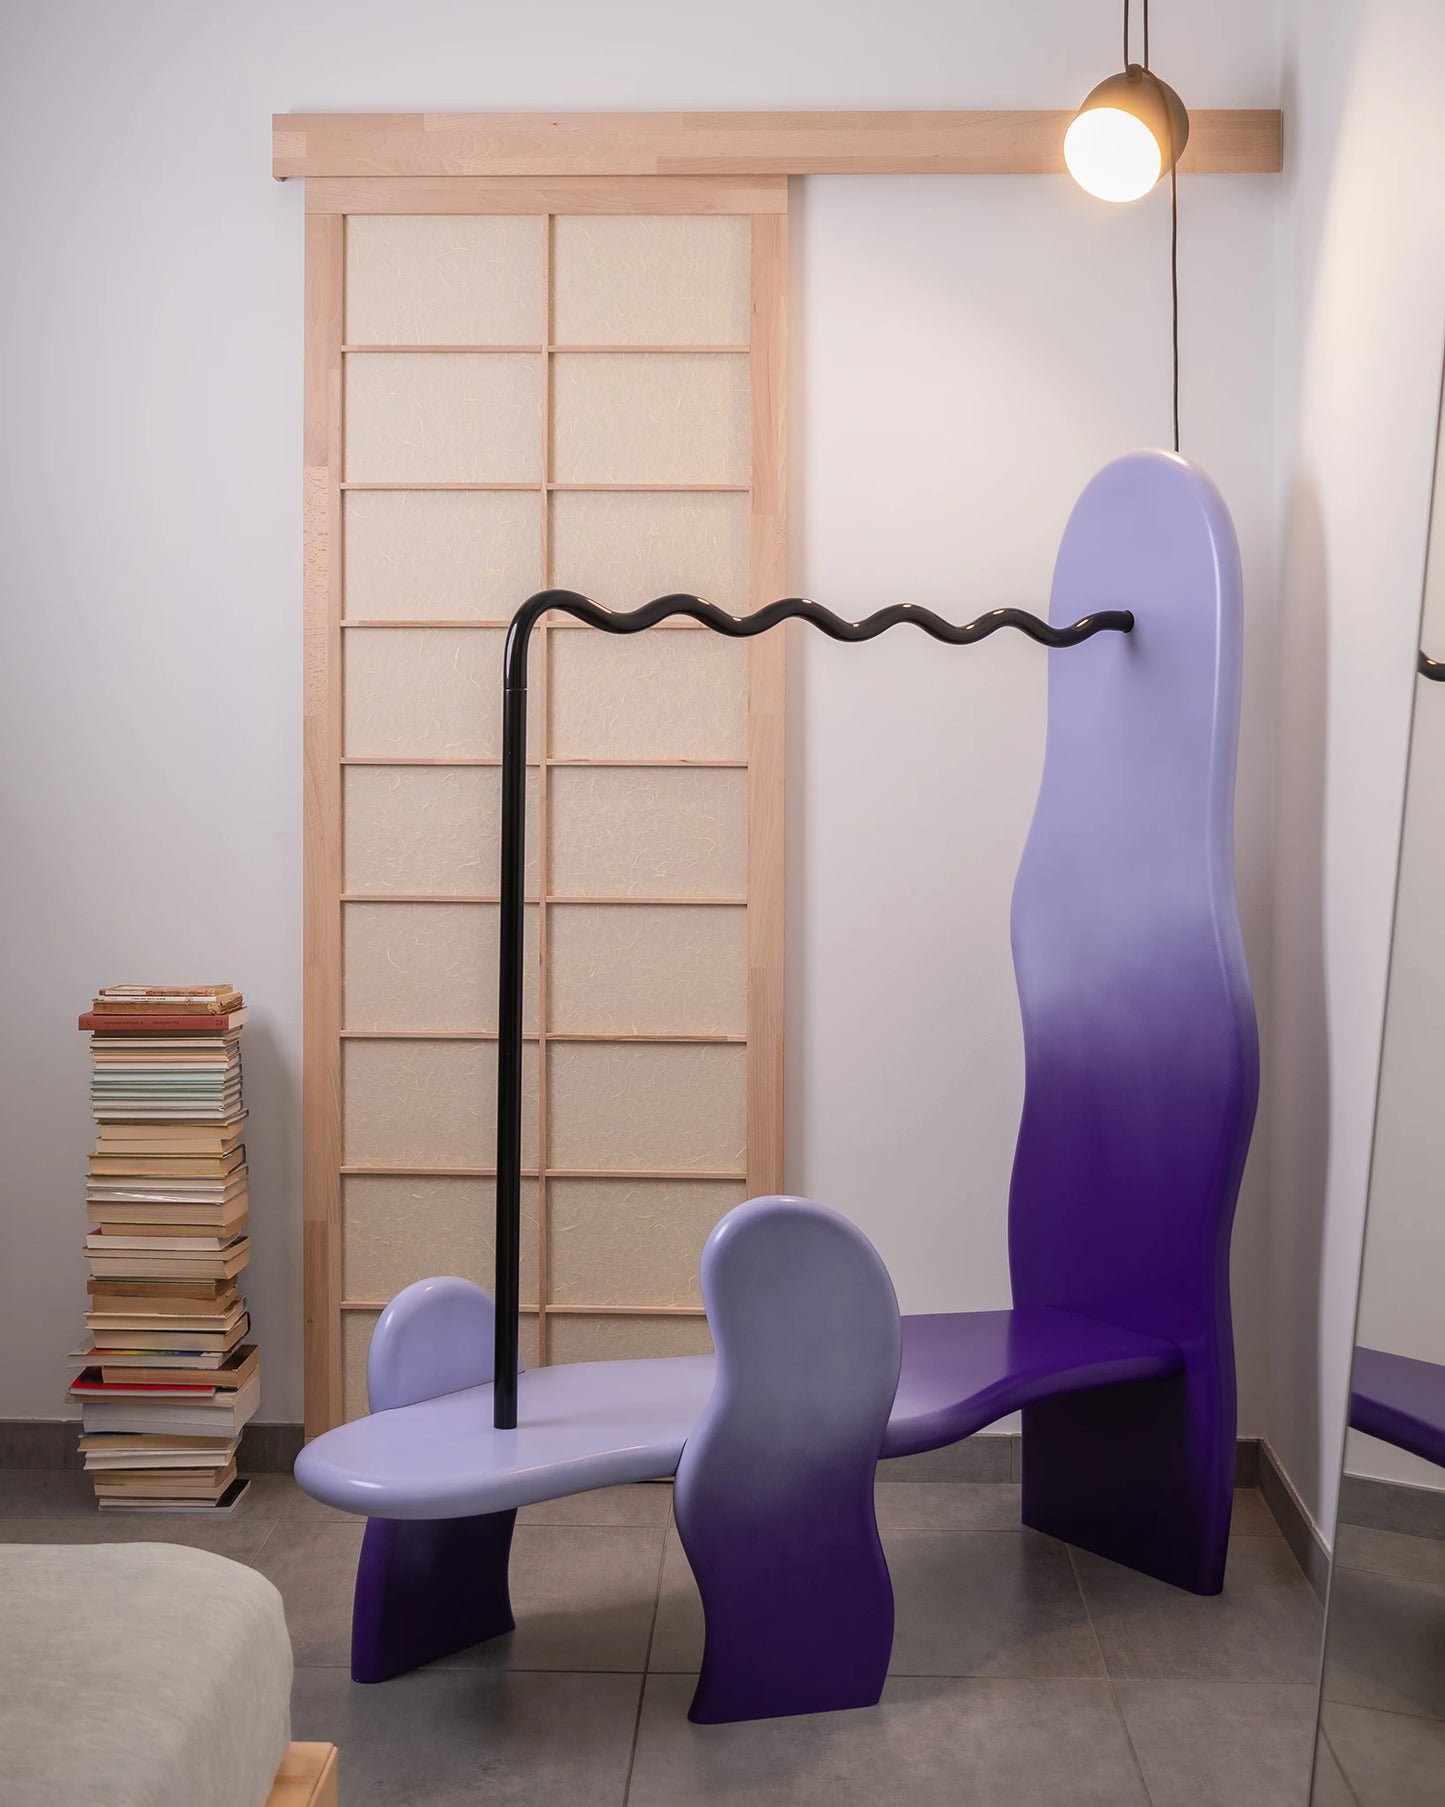 clothing rack in a home setting with soft shapes and a wavy metal hanging tube, purple gradient